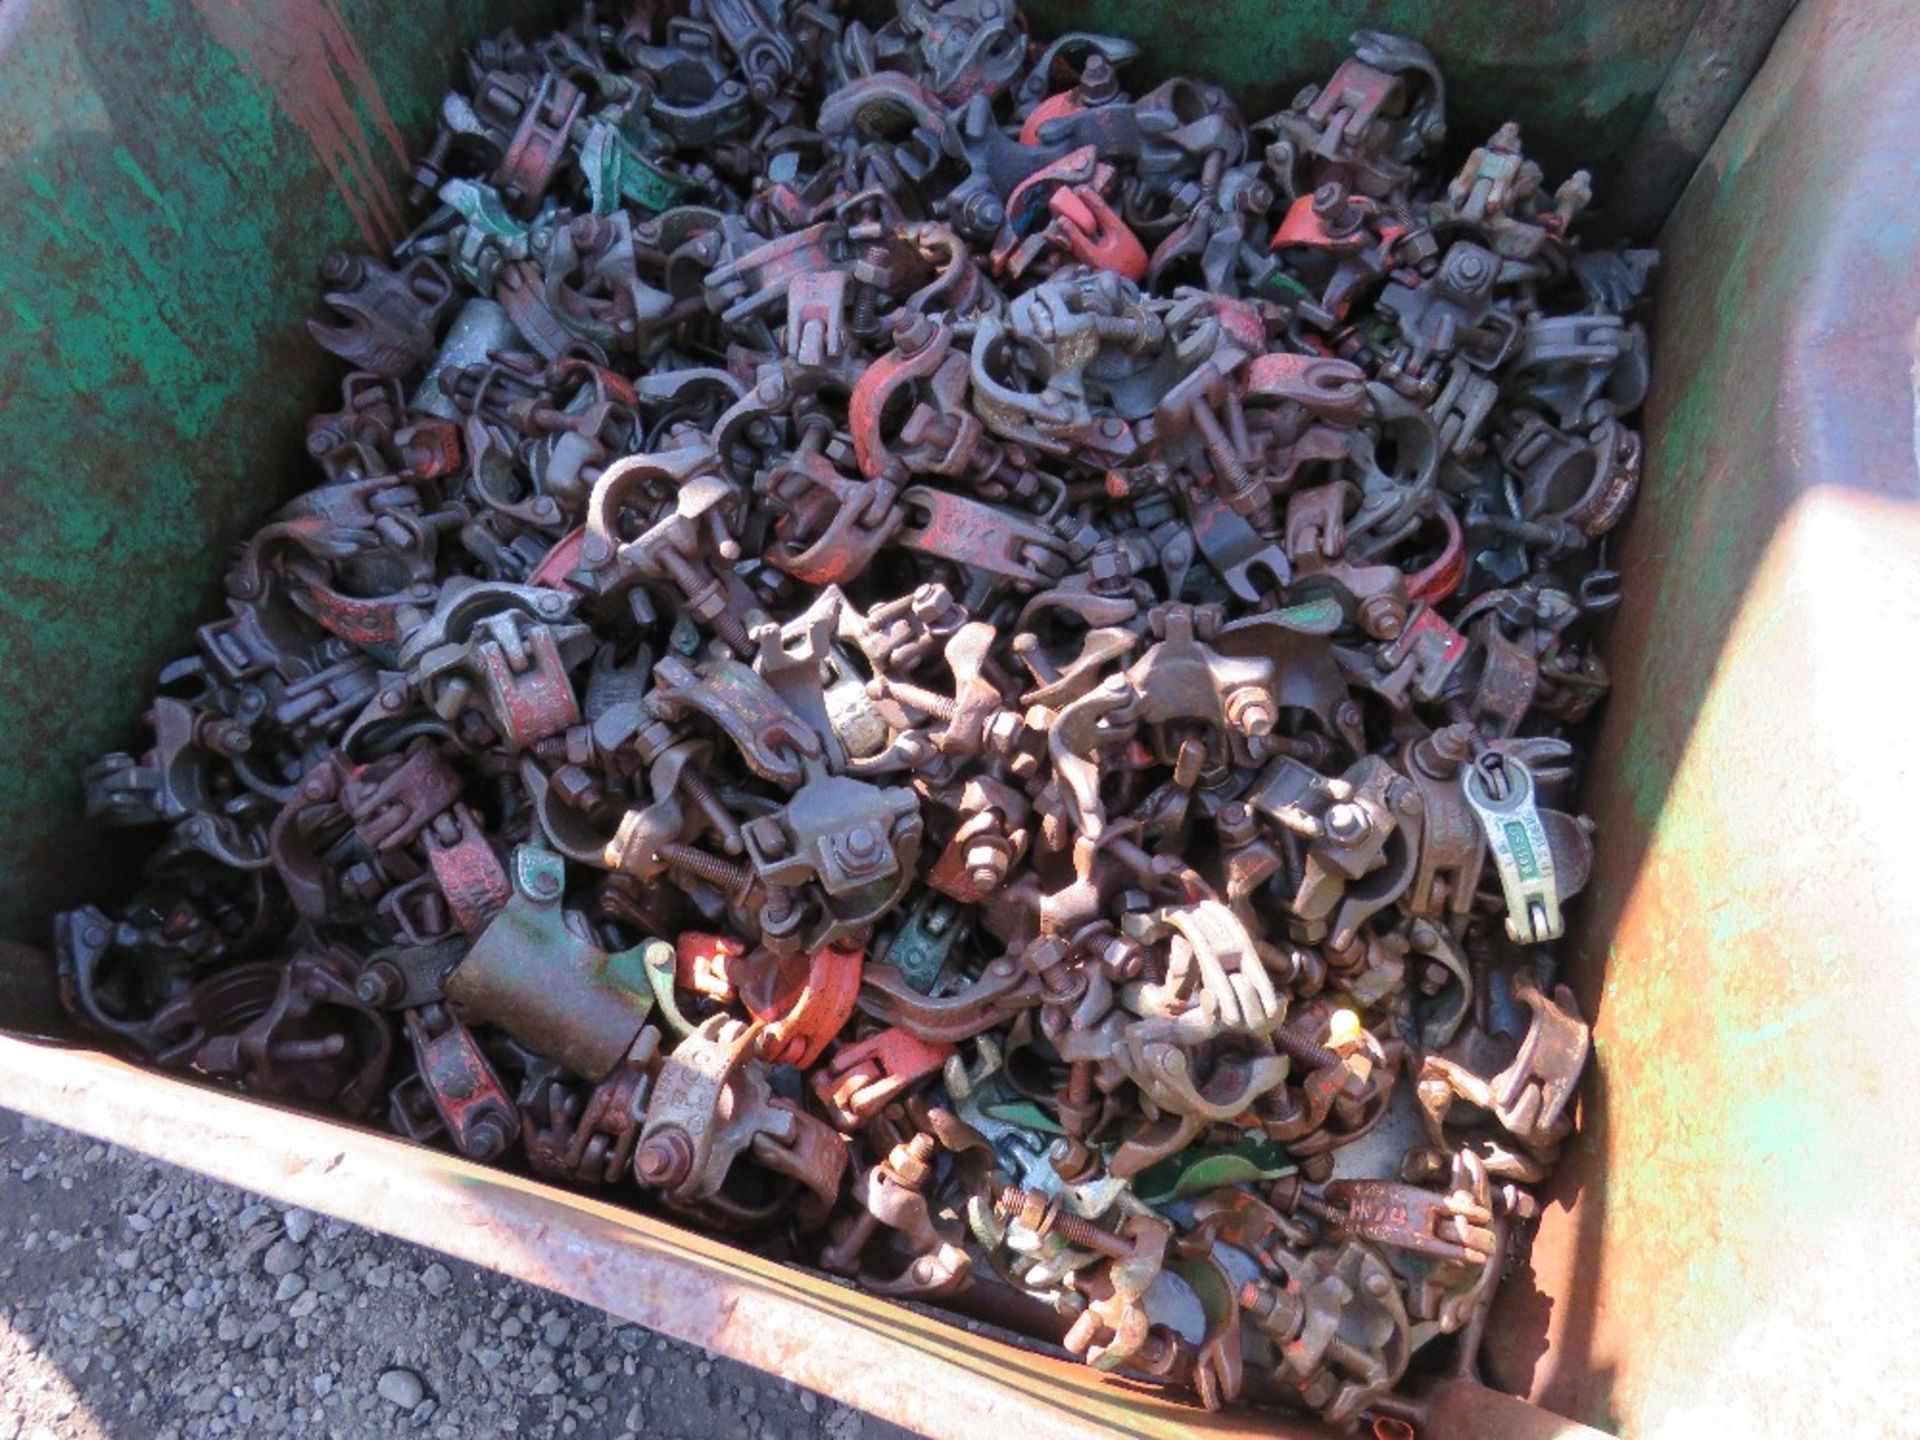 STILLAGE CONTAINING APPROXIMATELY 205 SCAFFOLD CLIPS. - Image 2 of 4